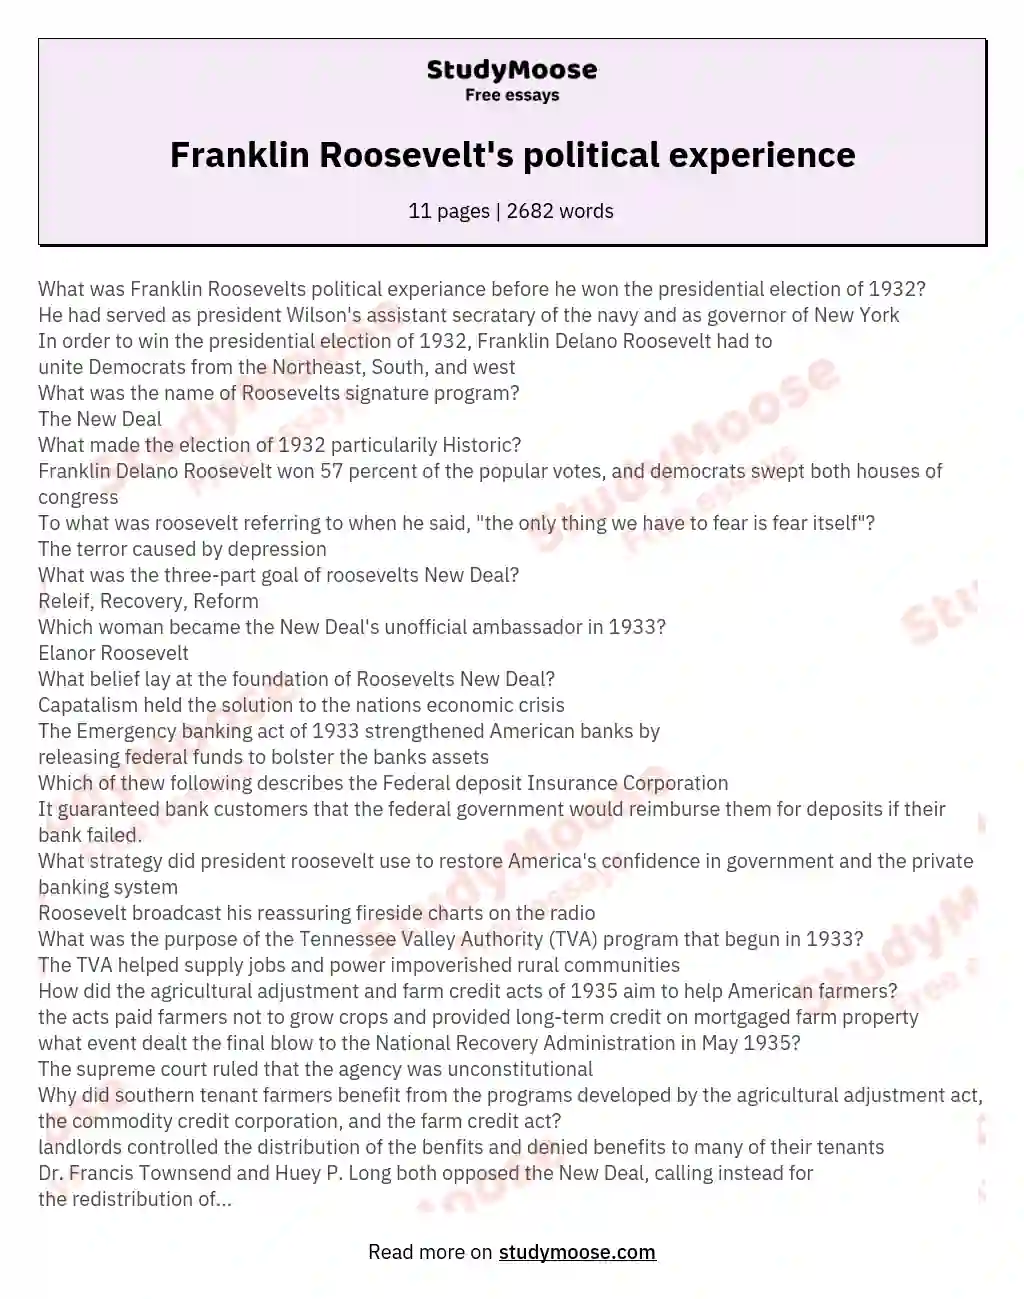 Franklin Roosevelt's political experience essay